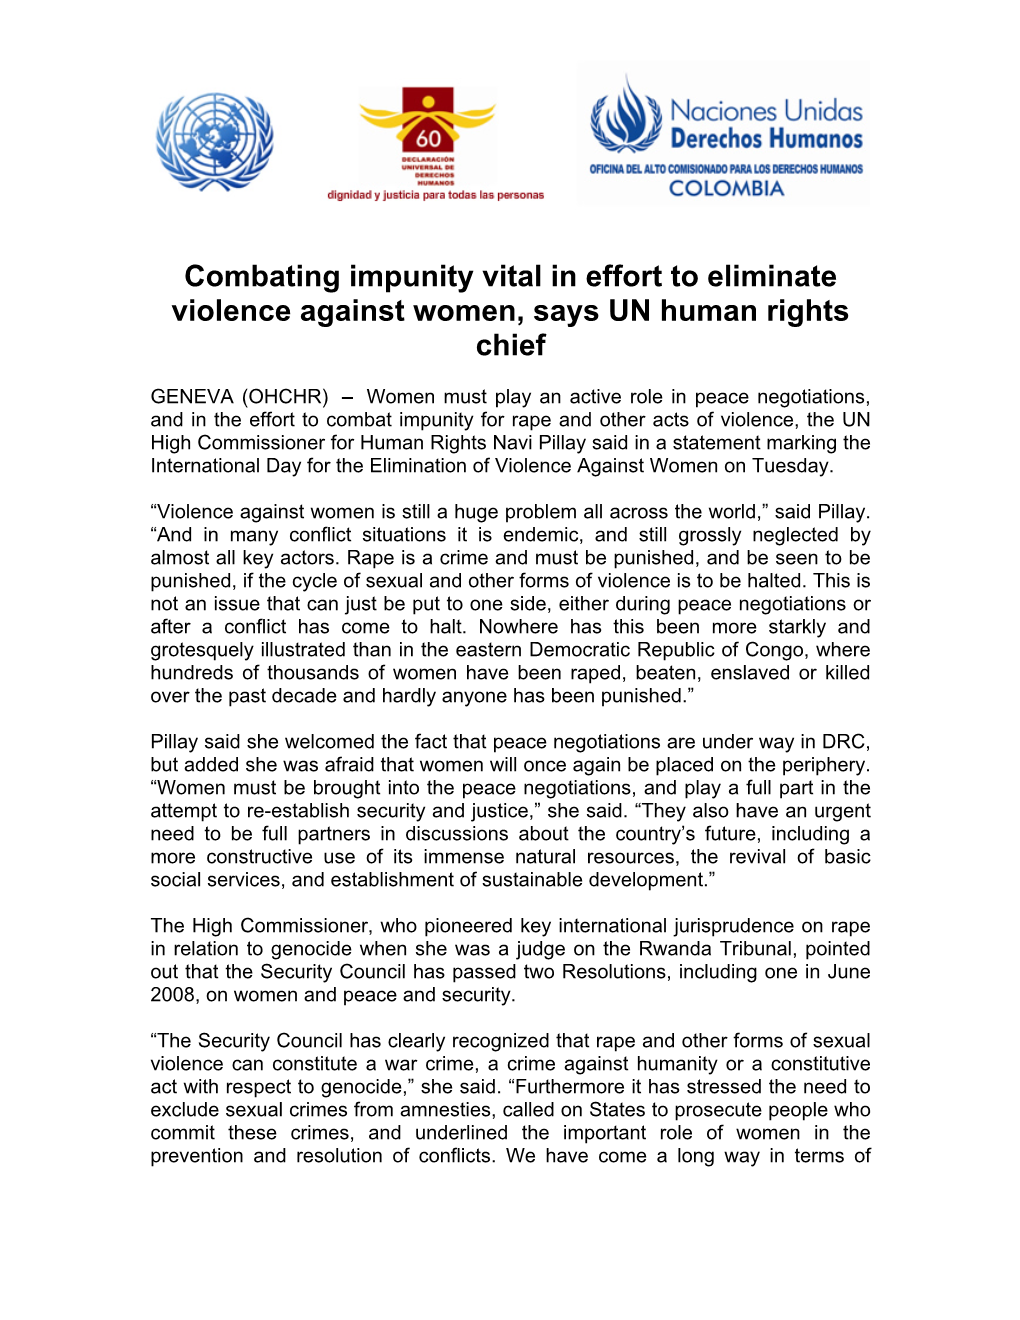 Combating Impunity Vital in Effort to Eliminate Violence Against Women, Says UN Human Rights Chief